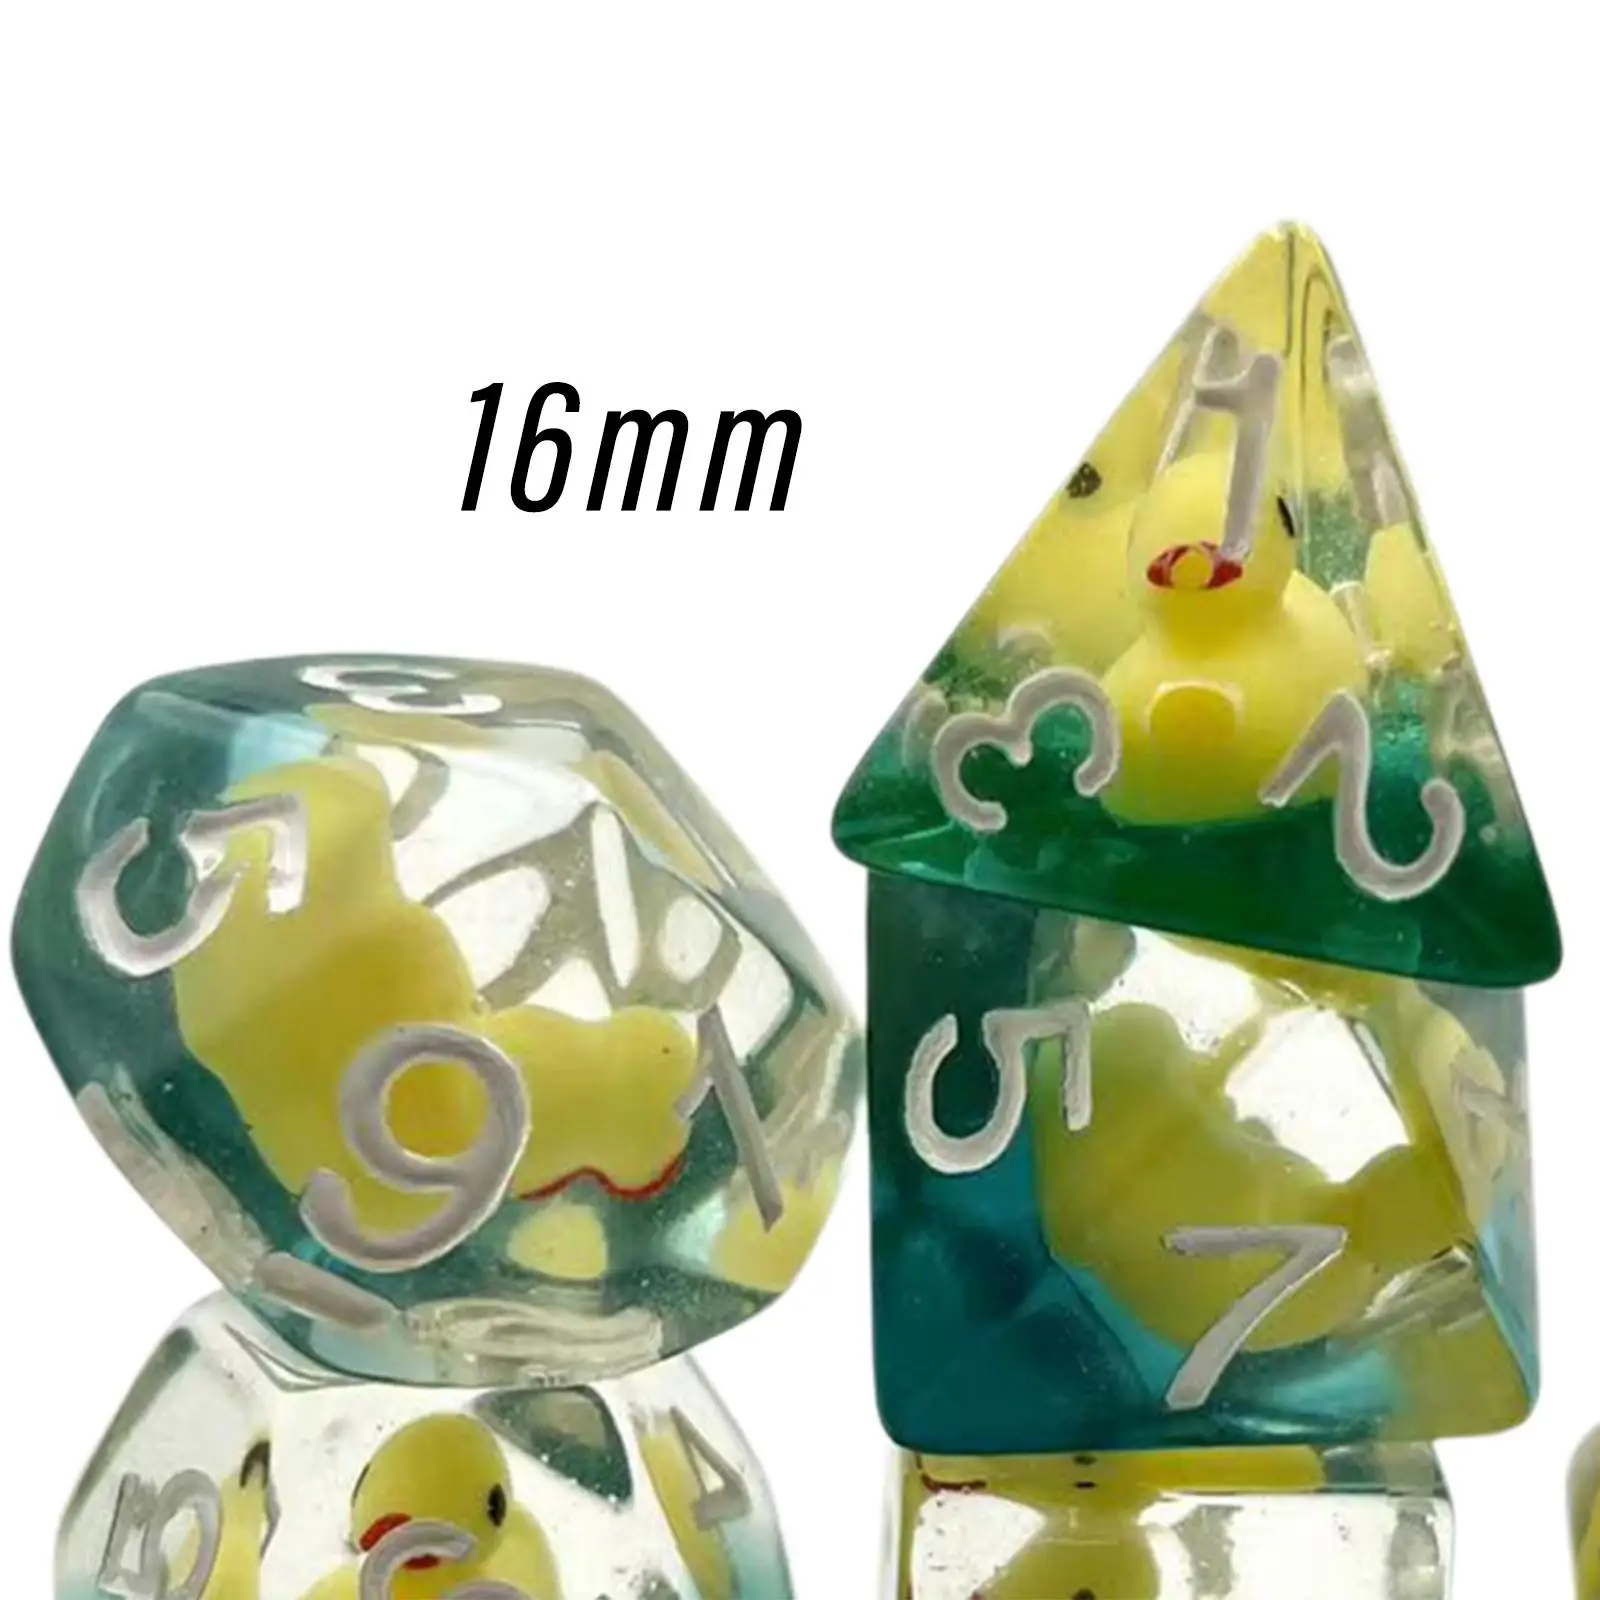 7 Pieces Polyhedral Dices Set Filled with Ducks Animal for MTG Board Game D8 d10 d12 d20 7 Die Polyhedral Dices Set